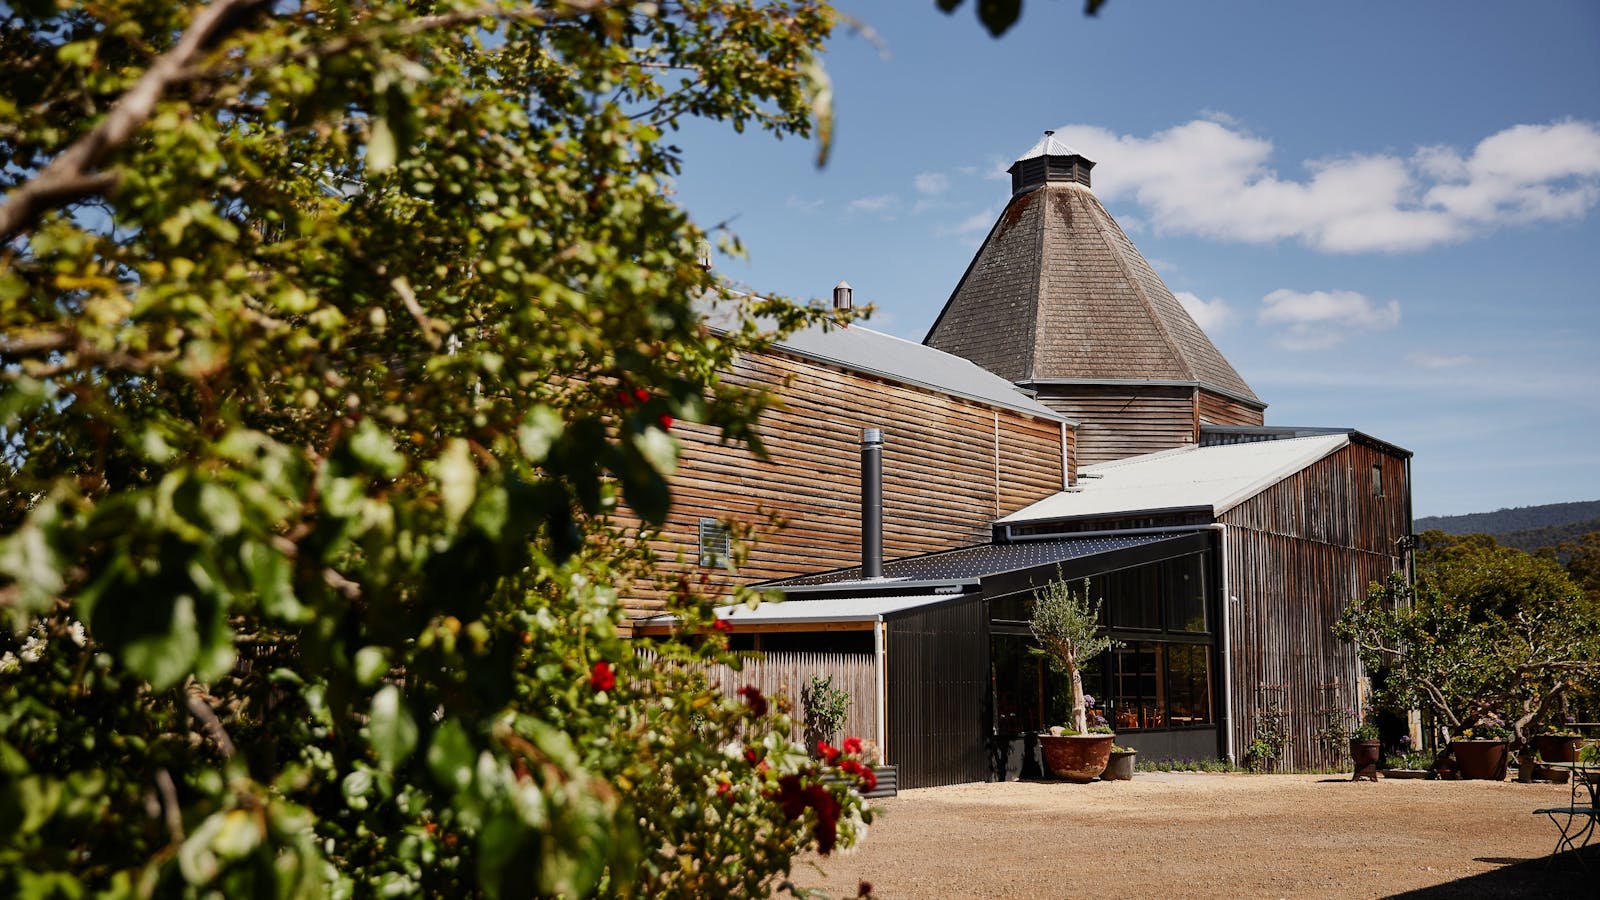 The Kiln is located inside a heritage oast house, built in the early 1900s to dry hops.